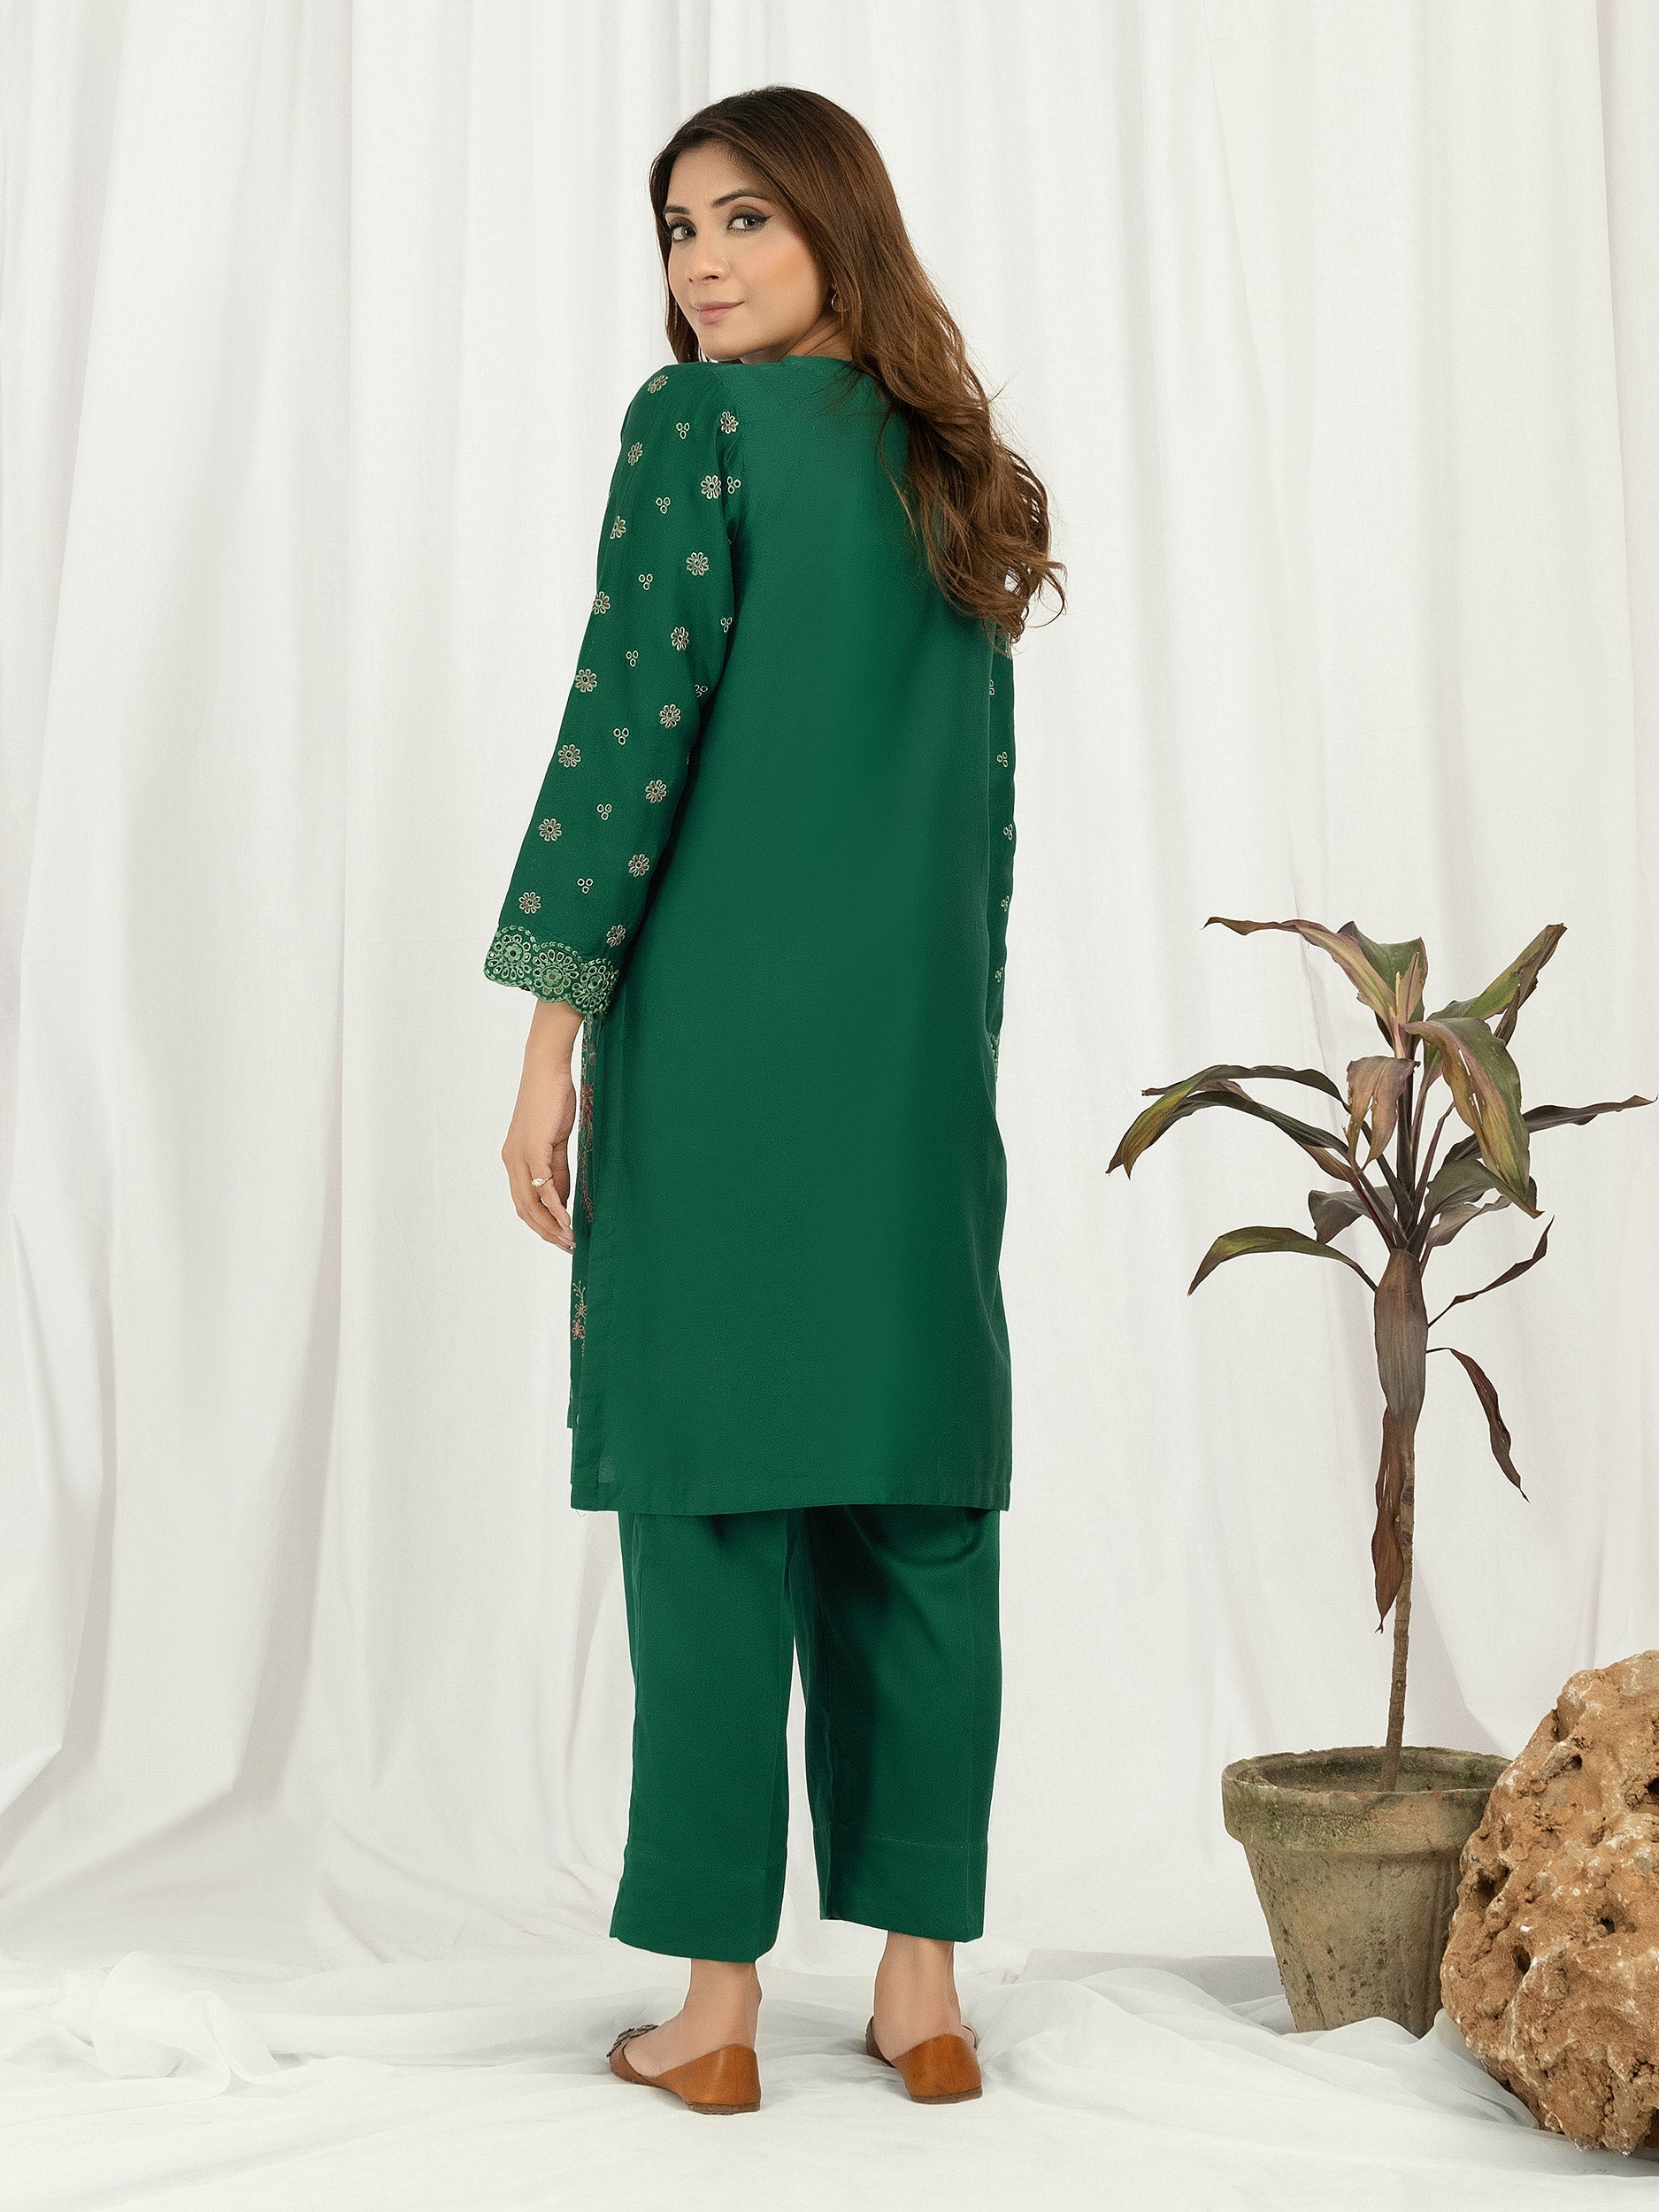 2 Piece Satin Suit-Embroidered (Pret)